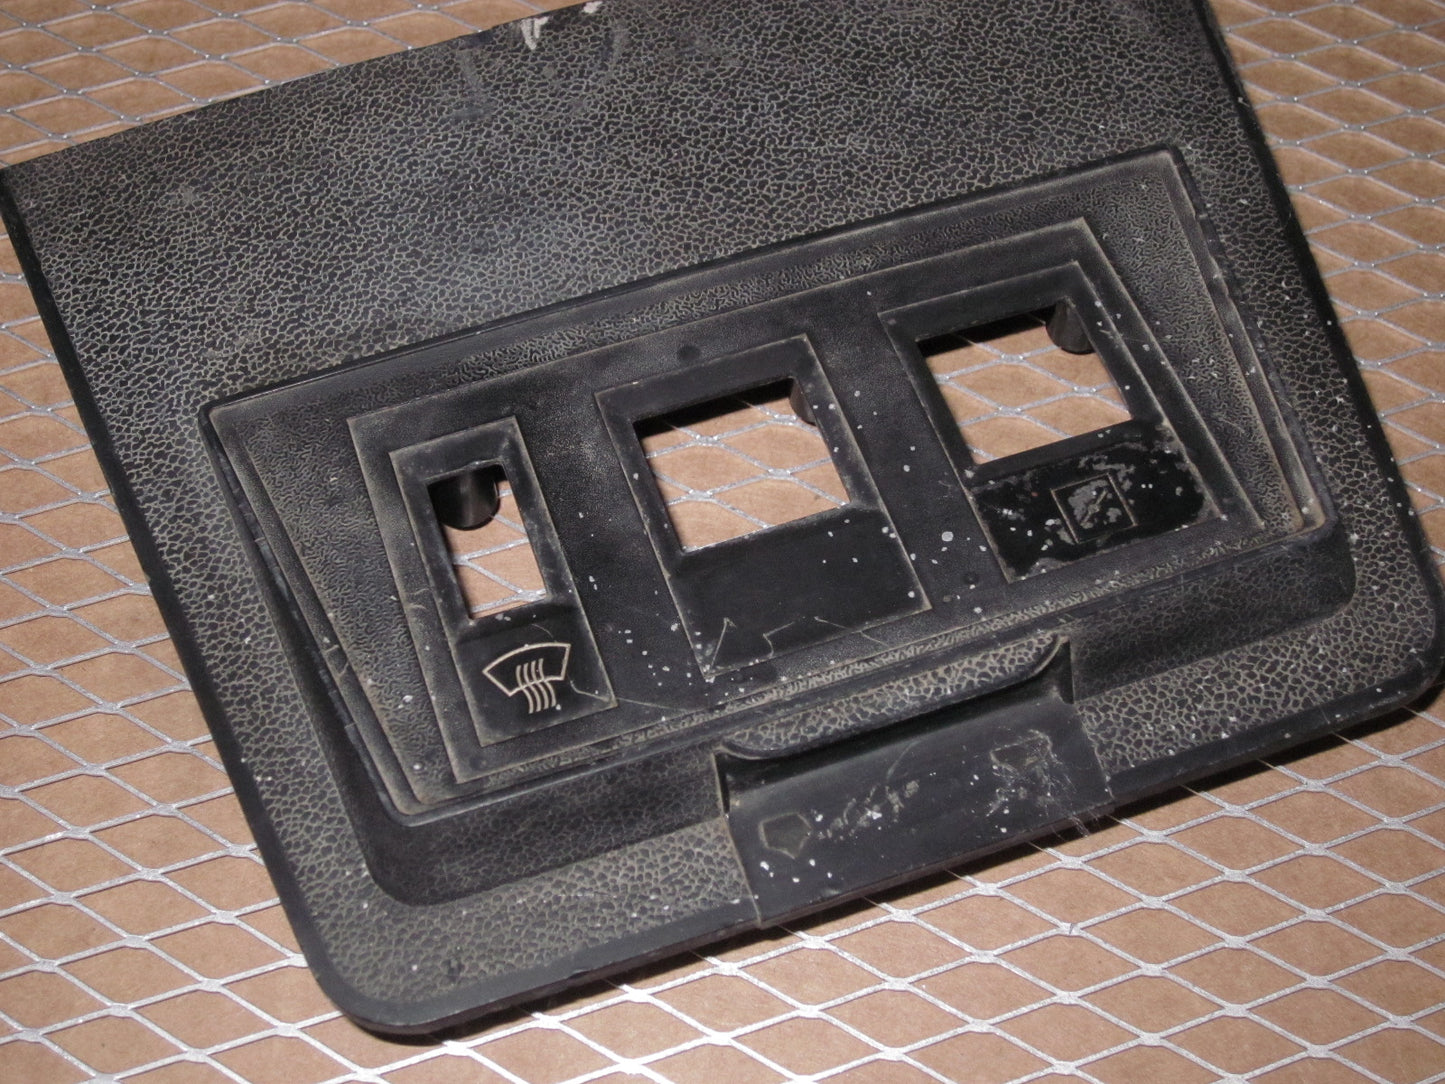 72 73 Datsun 240z OEM Console Defroster Switch Bezel Fuse Box Cover Panel